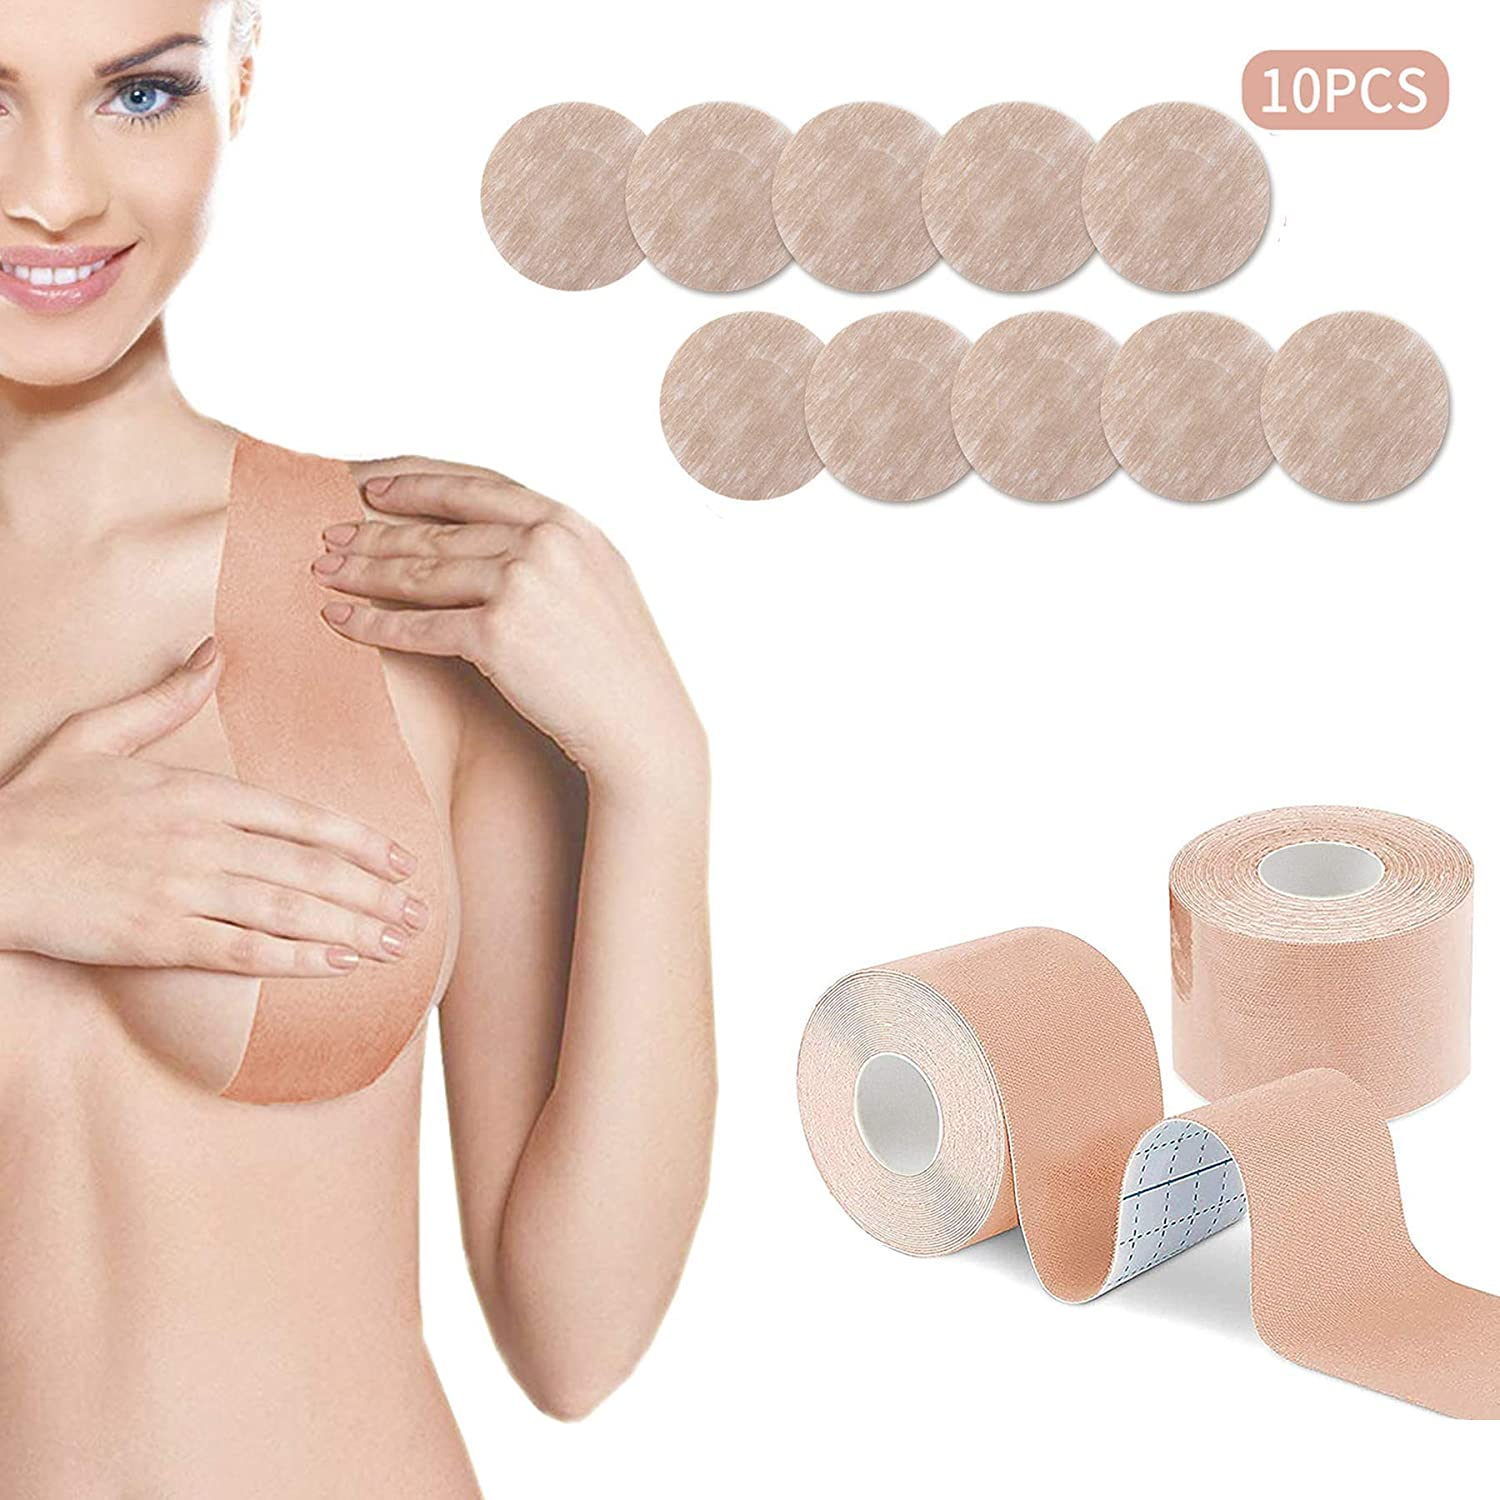 Boob Tape,Disposable Satin Nipple Cover,Lift up Invisible Bra Tape